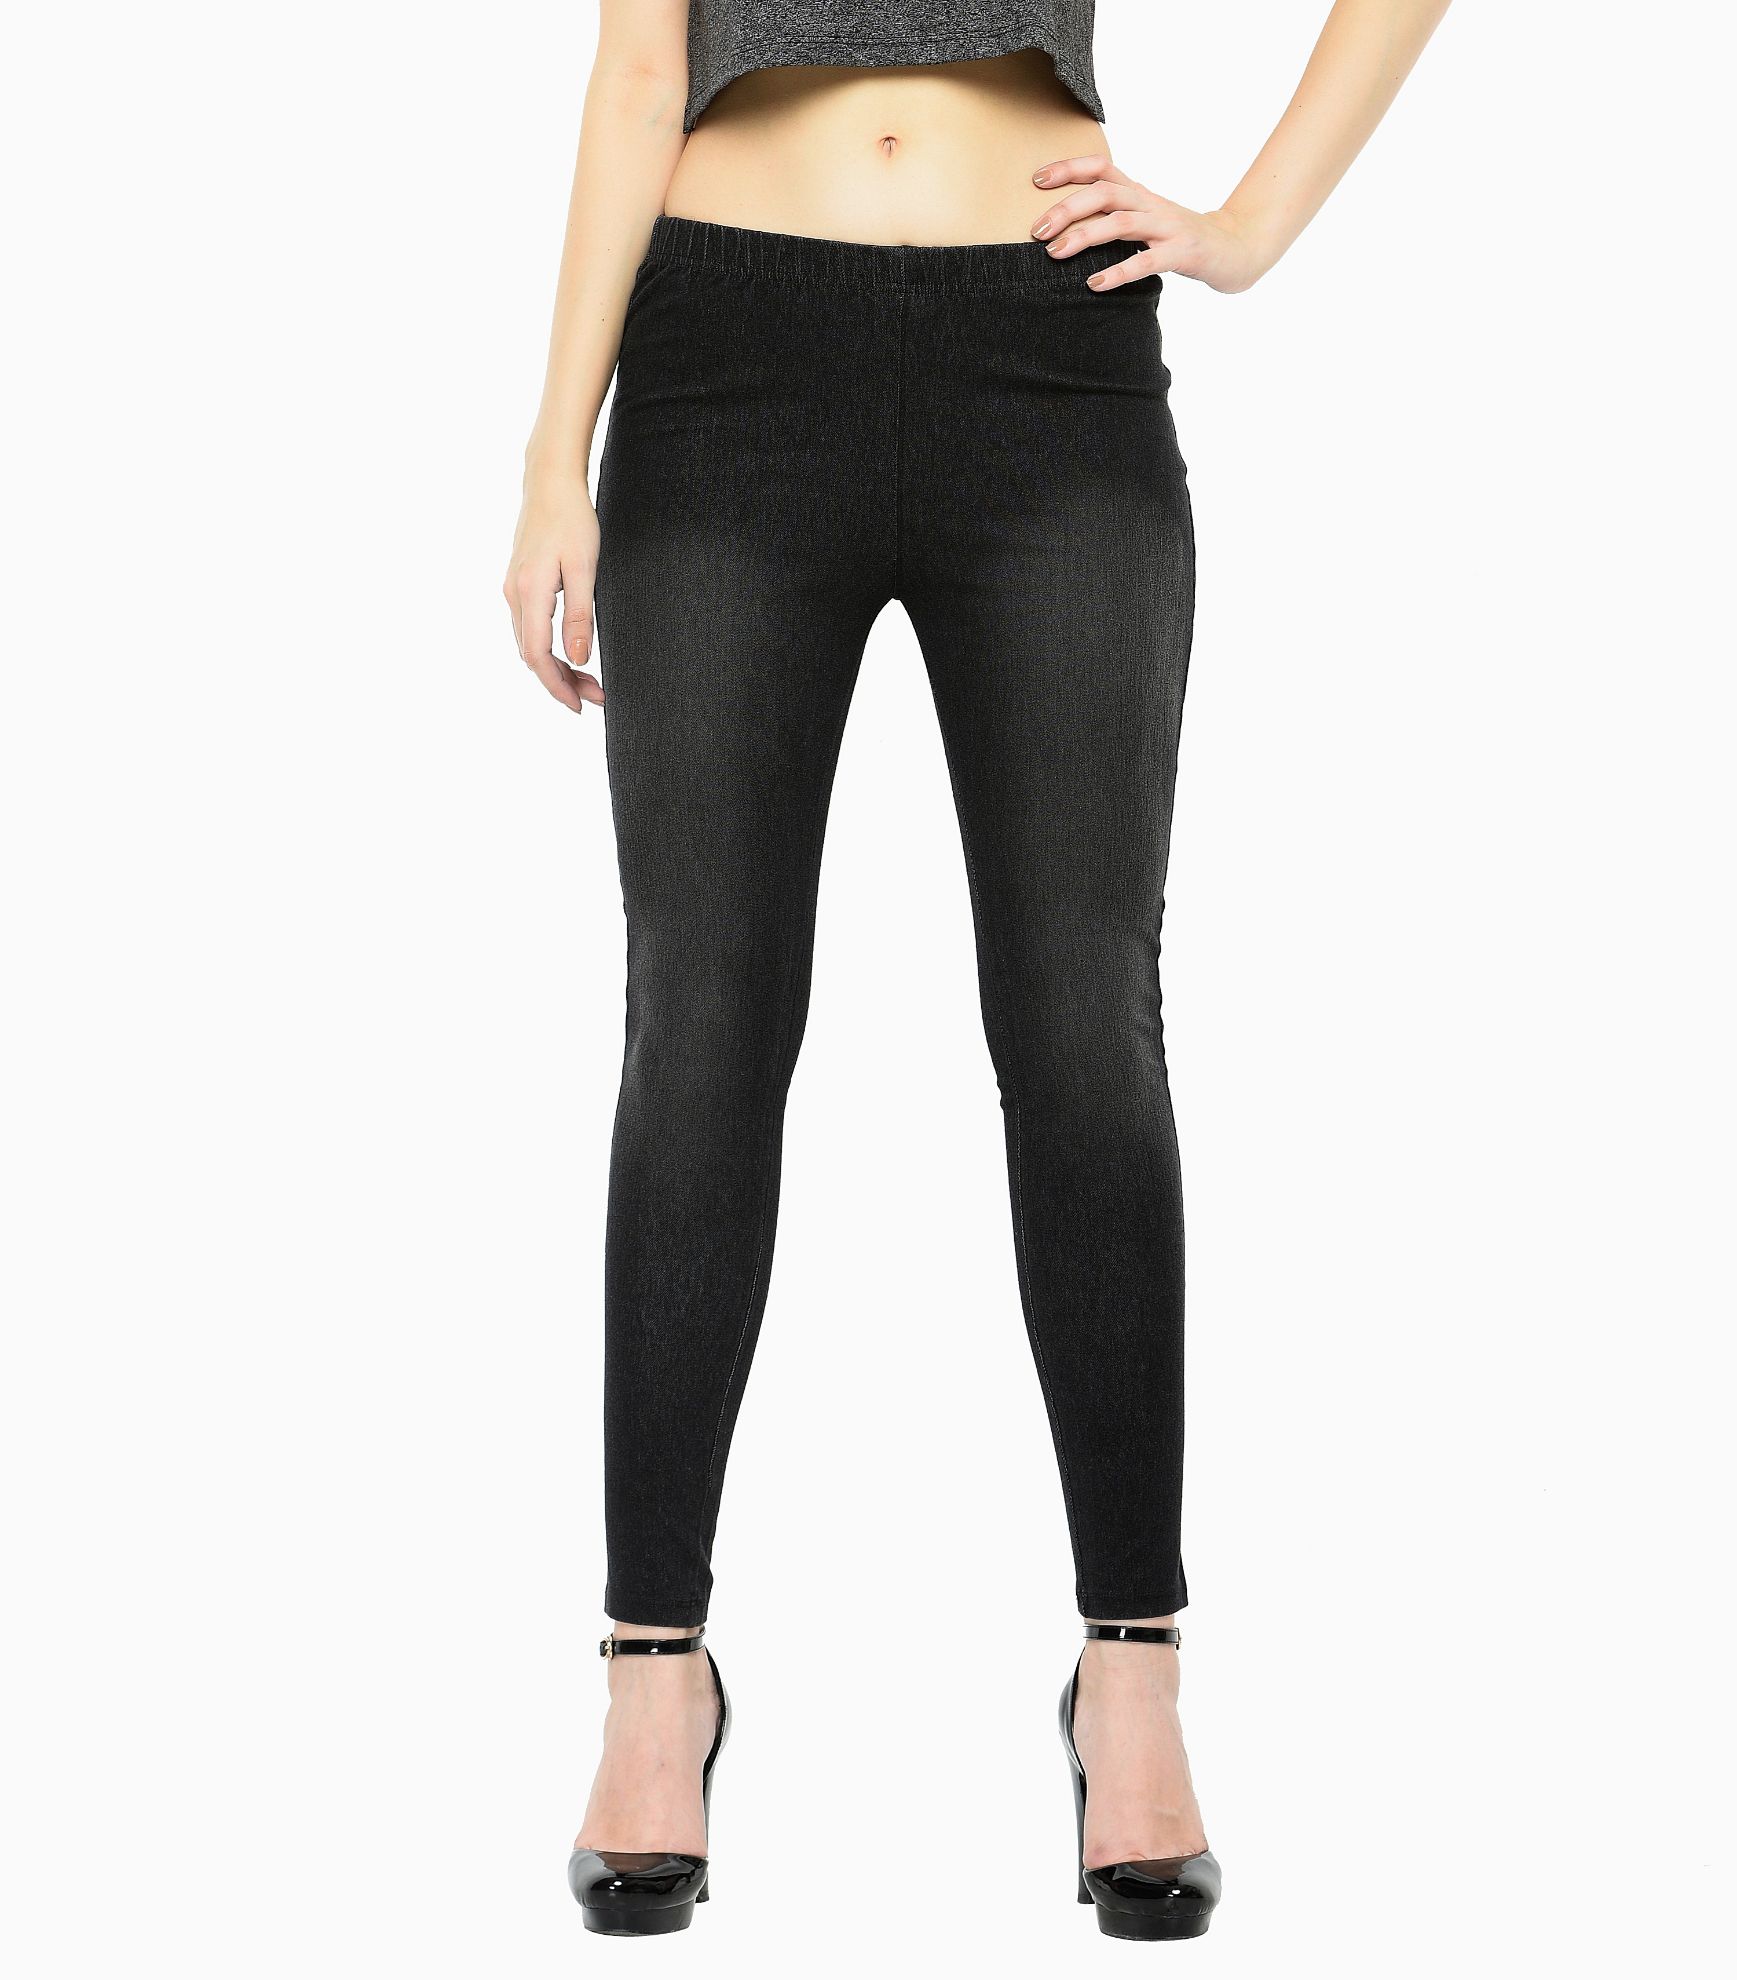 https://frenchtrendz.com/images/thumbs/0005814_frenchtrendzcotton-modal-spandex-black-denim-look-jegging.jpeg